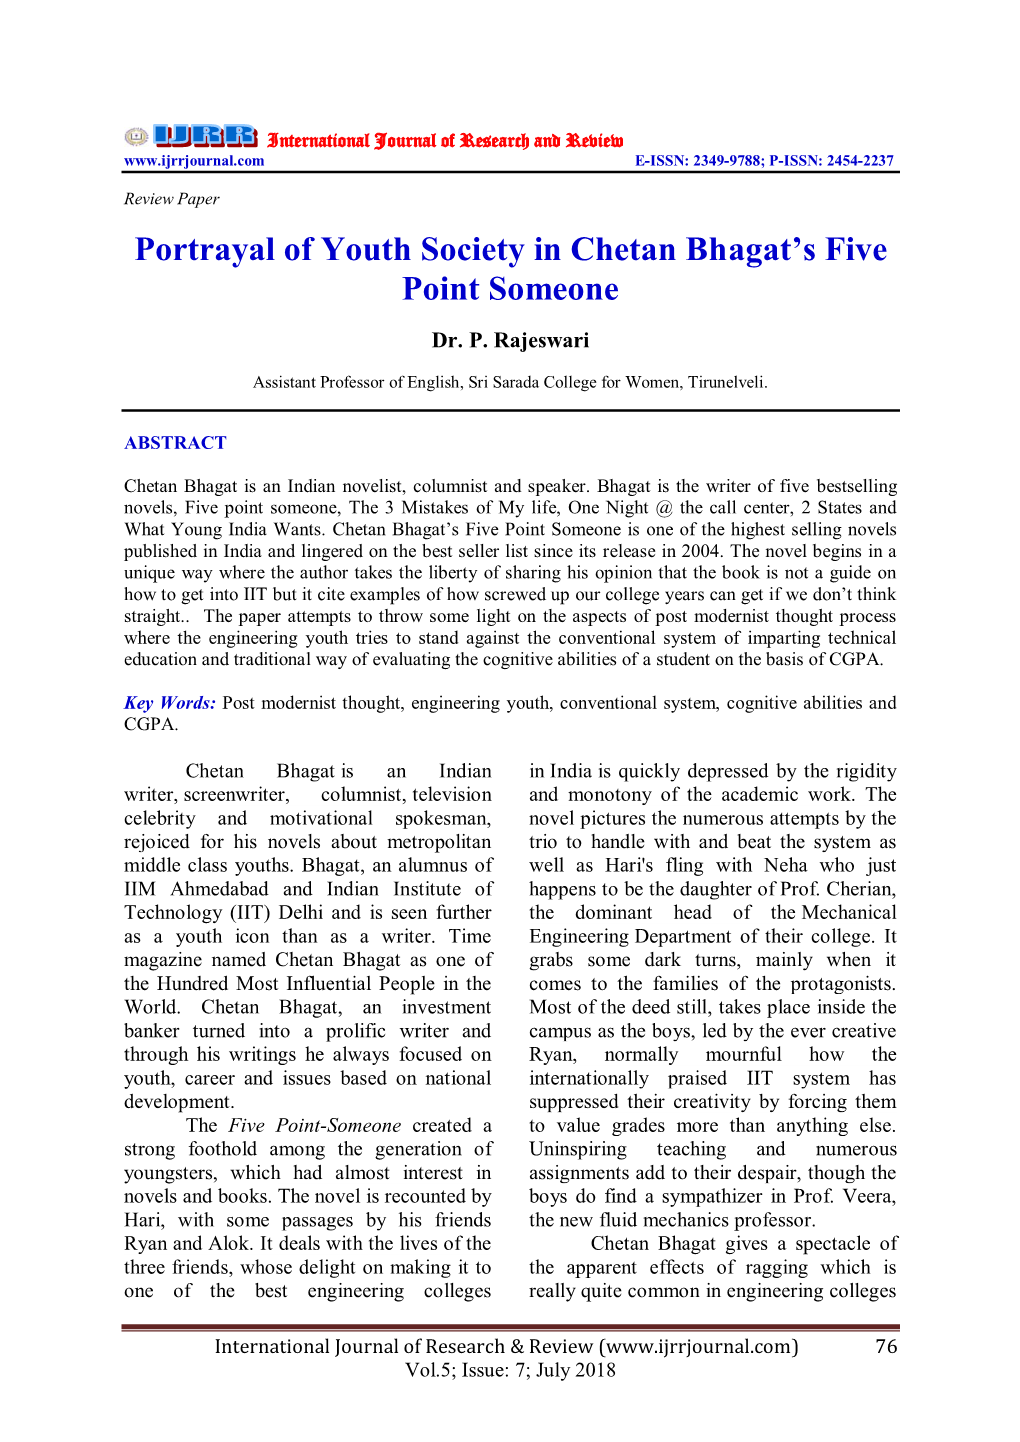 Portrayal of Youth Society in Chetan Bhagat's Five Point Someone